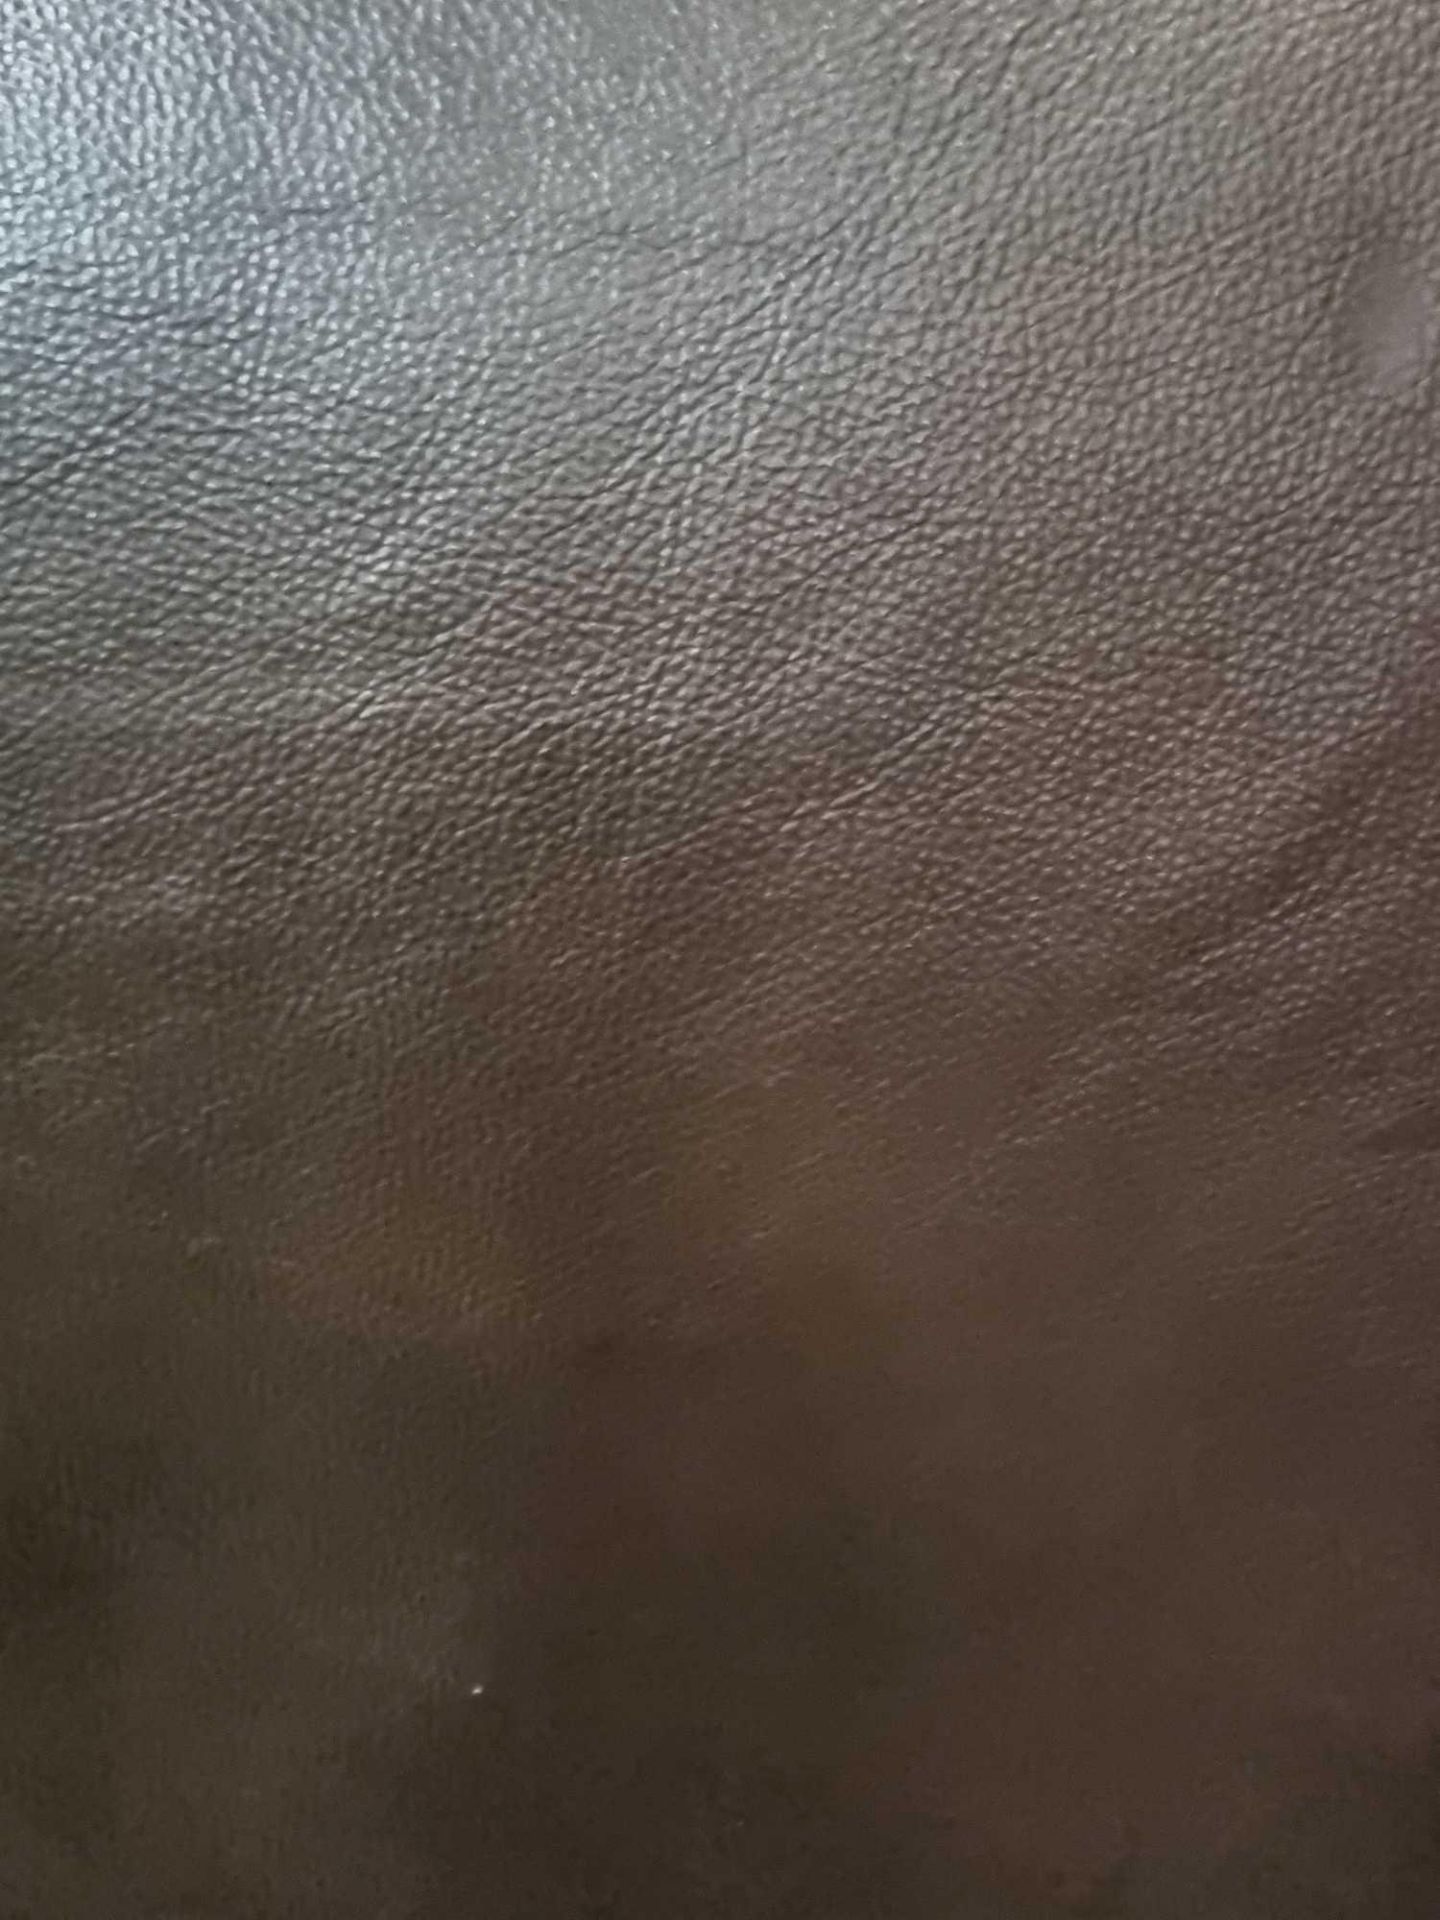 Chocolate Leather Hide approximately 2 4M2 2 x 1 2cm ( Hide No,165) - Image 2 of 2